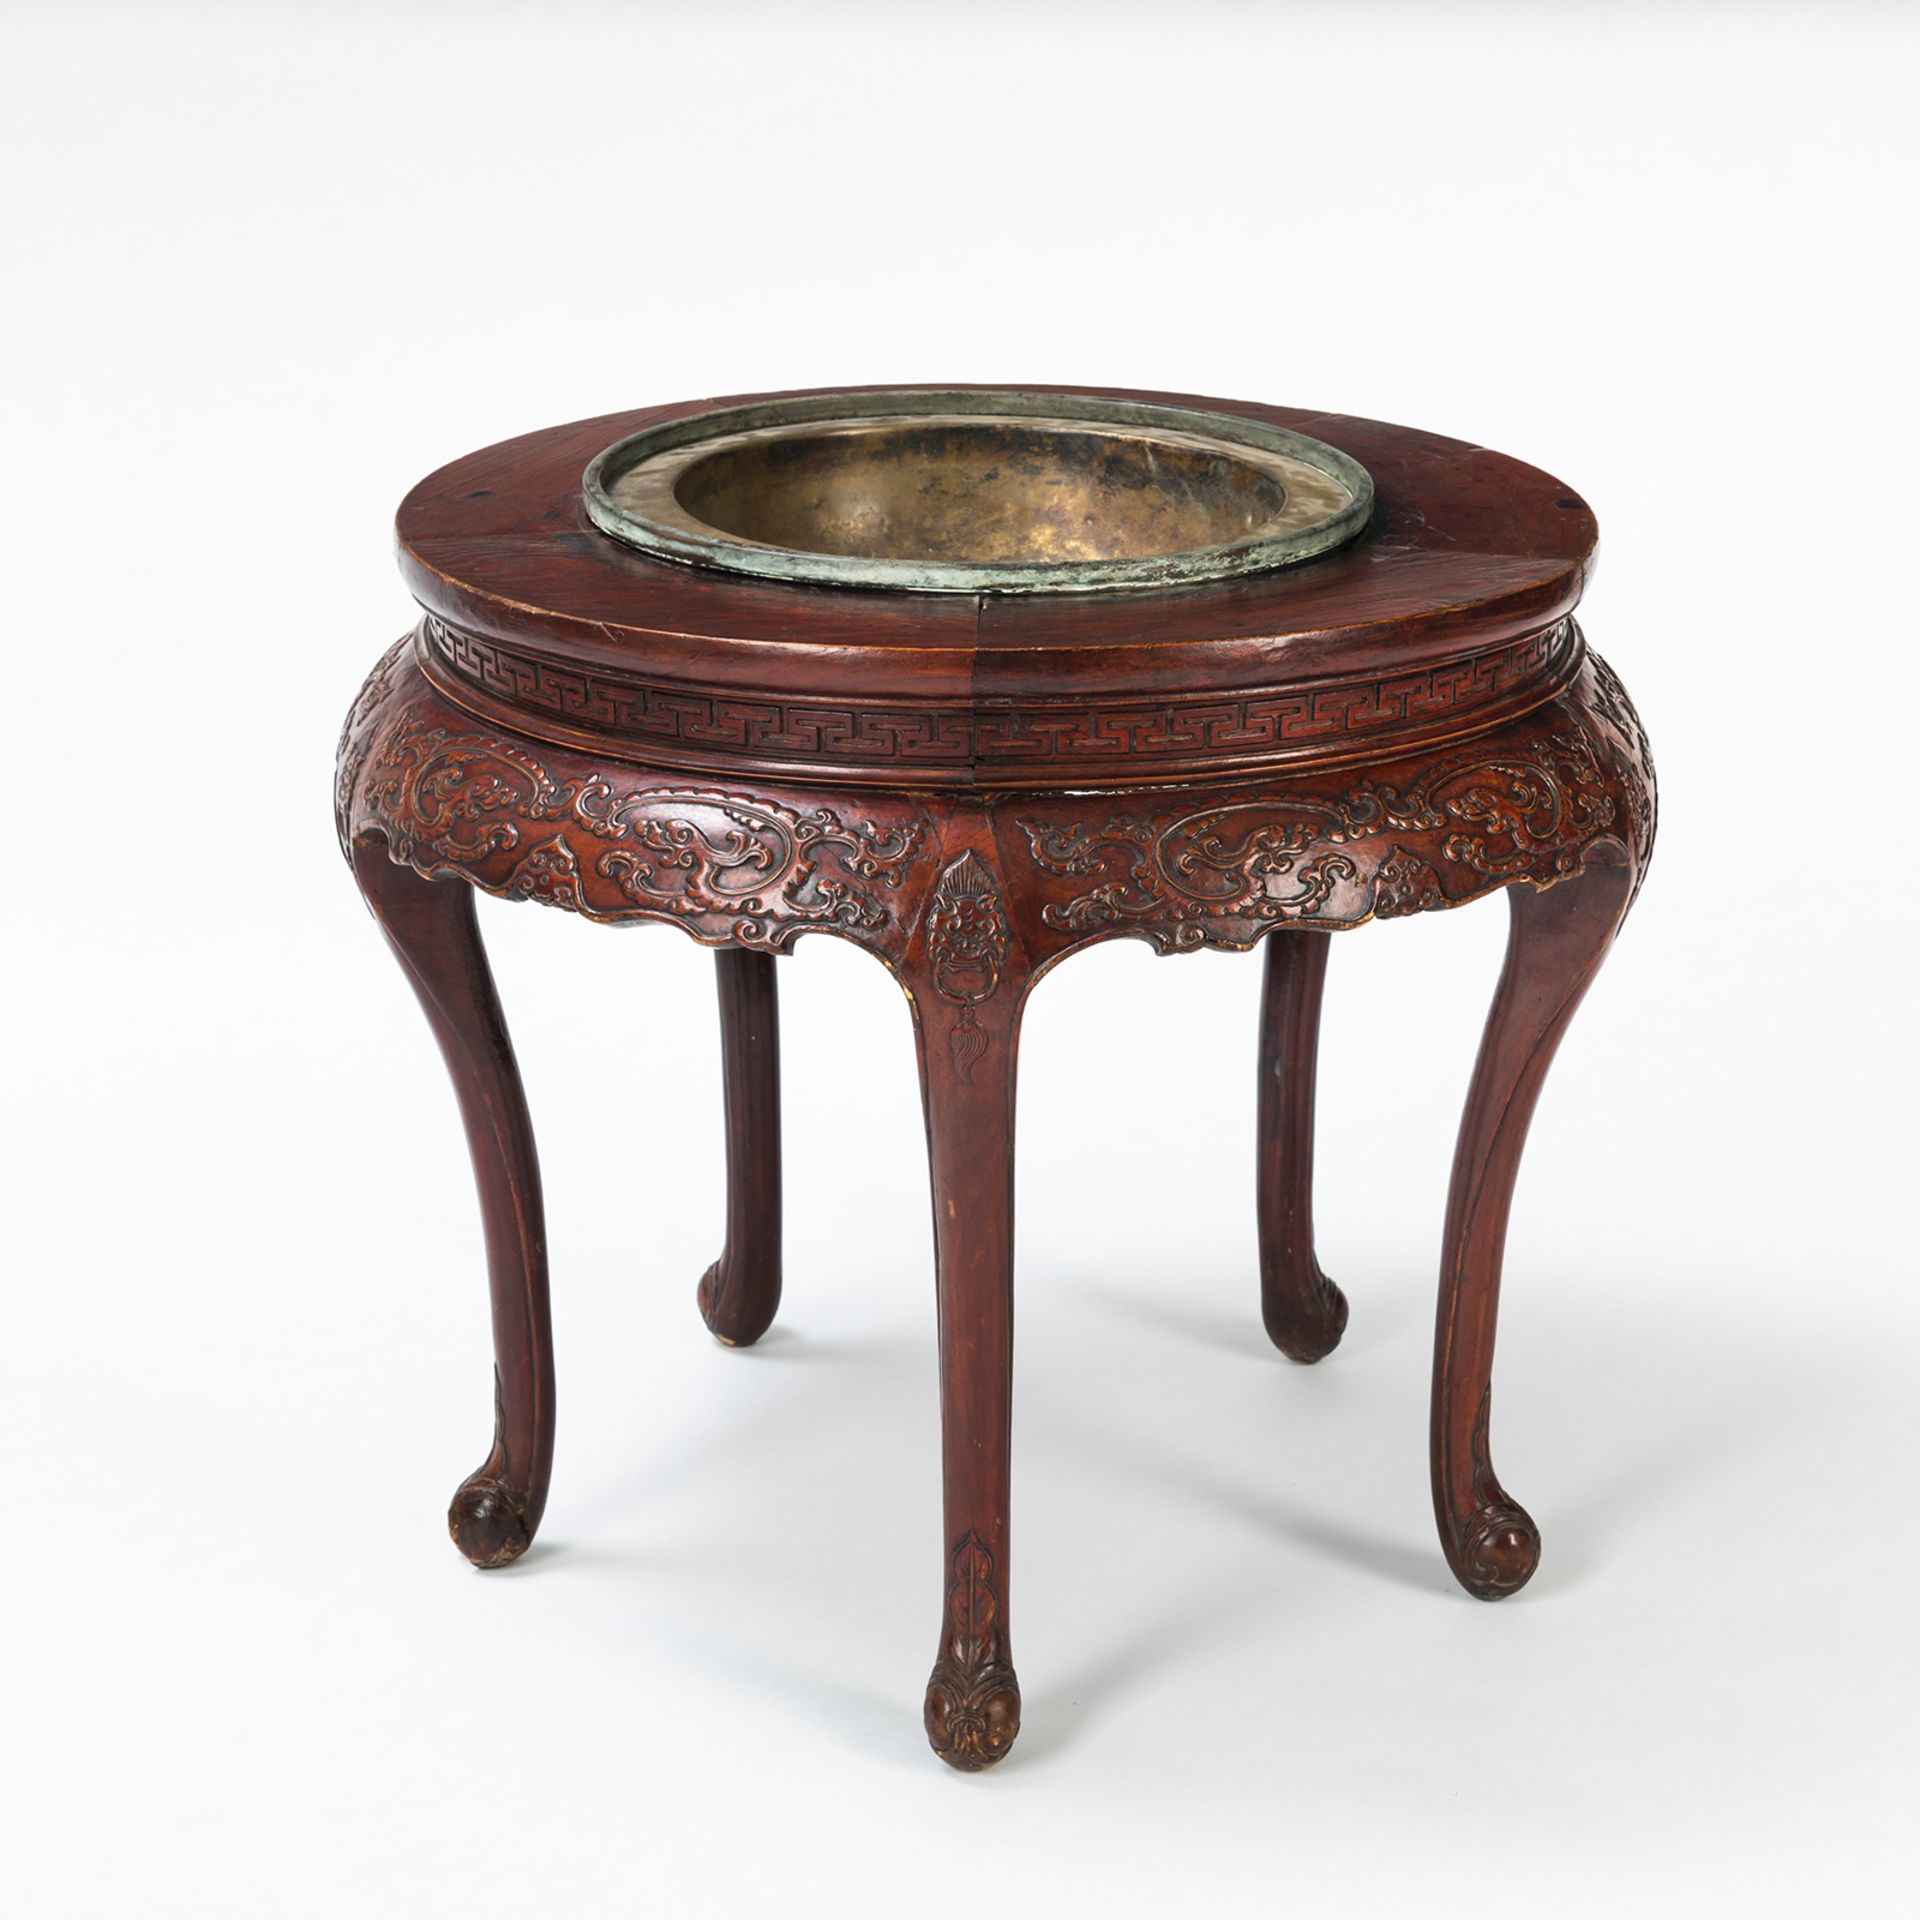 A CIRCULAR DRAGON RELIEF WOOD TABLE WITH METAL BASIN